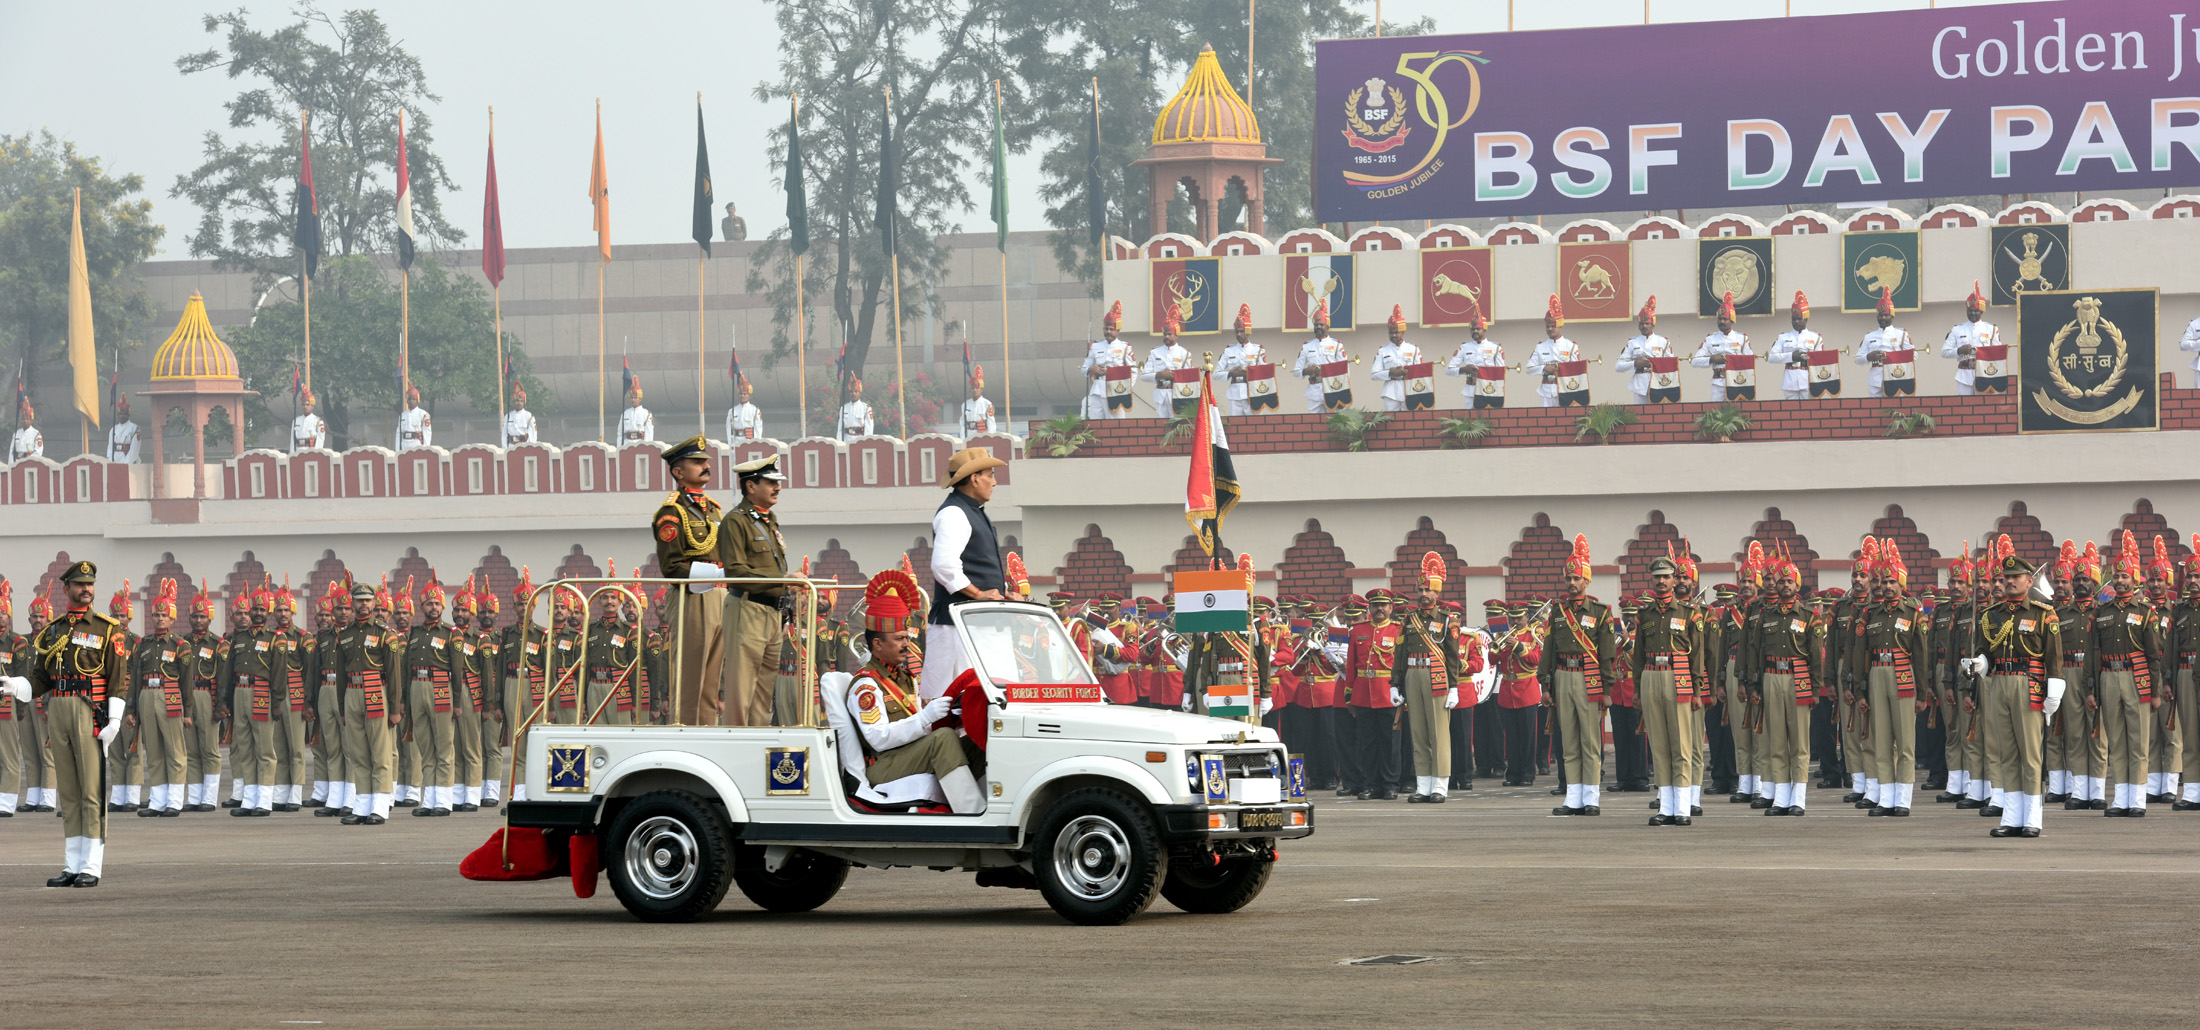 The Union Home Minister, Shri Rajnath Singh reviewing the BSF Golden Jubilee Parade, in New Delhi on December 01, 2015.  	The DG, BSF, Shri D.K. Pathak is also seen.